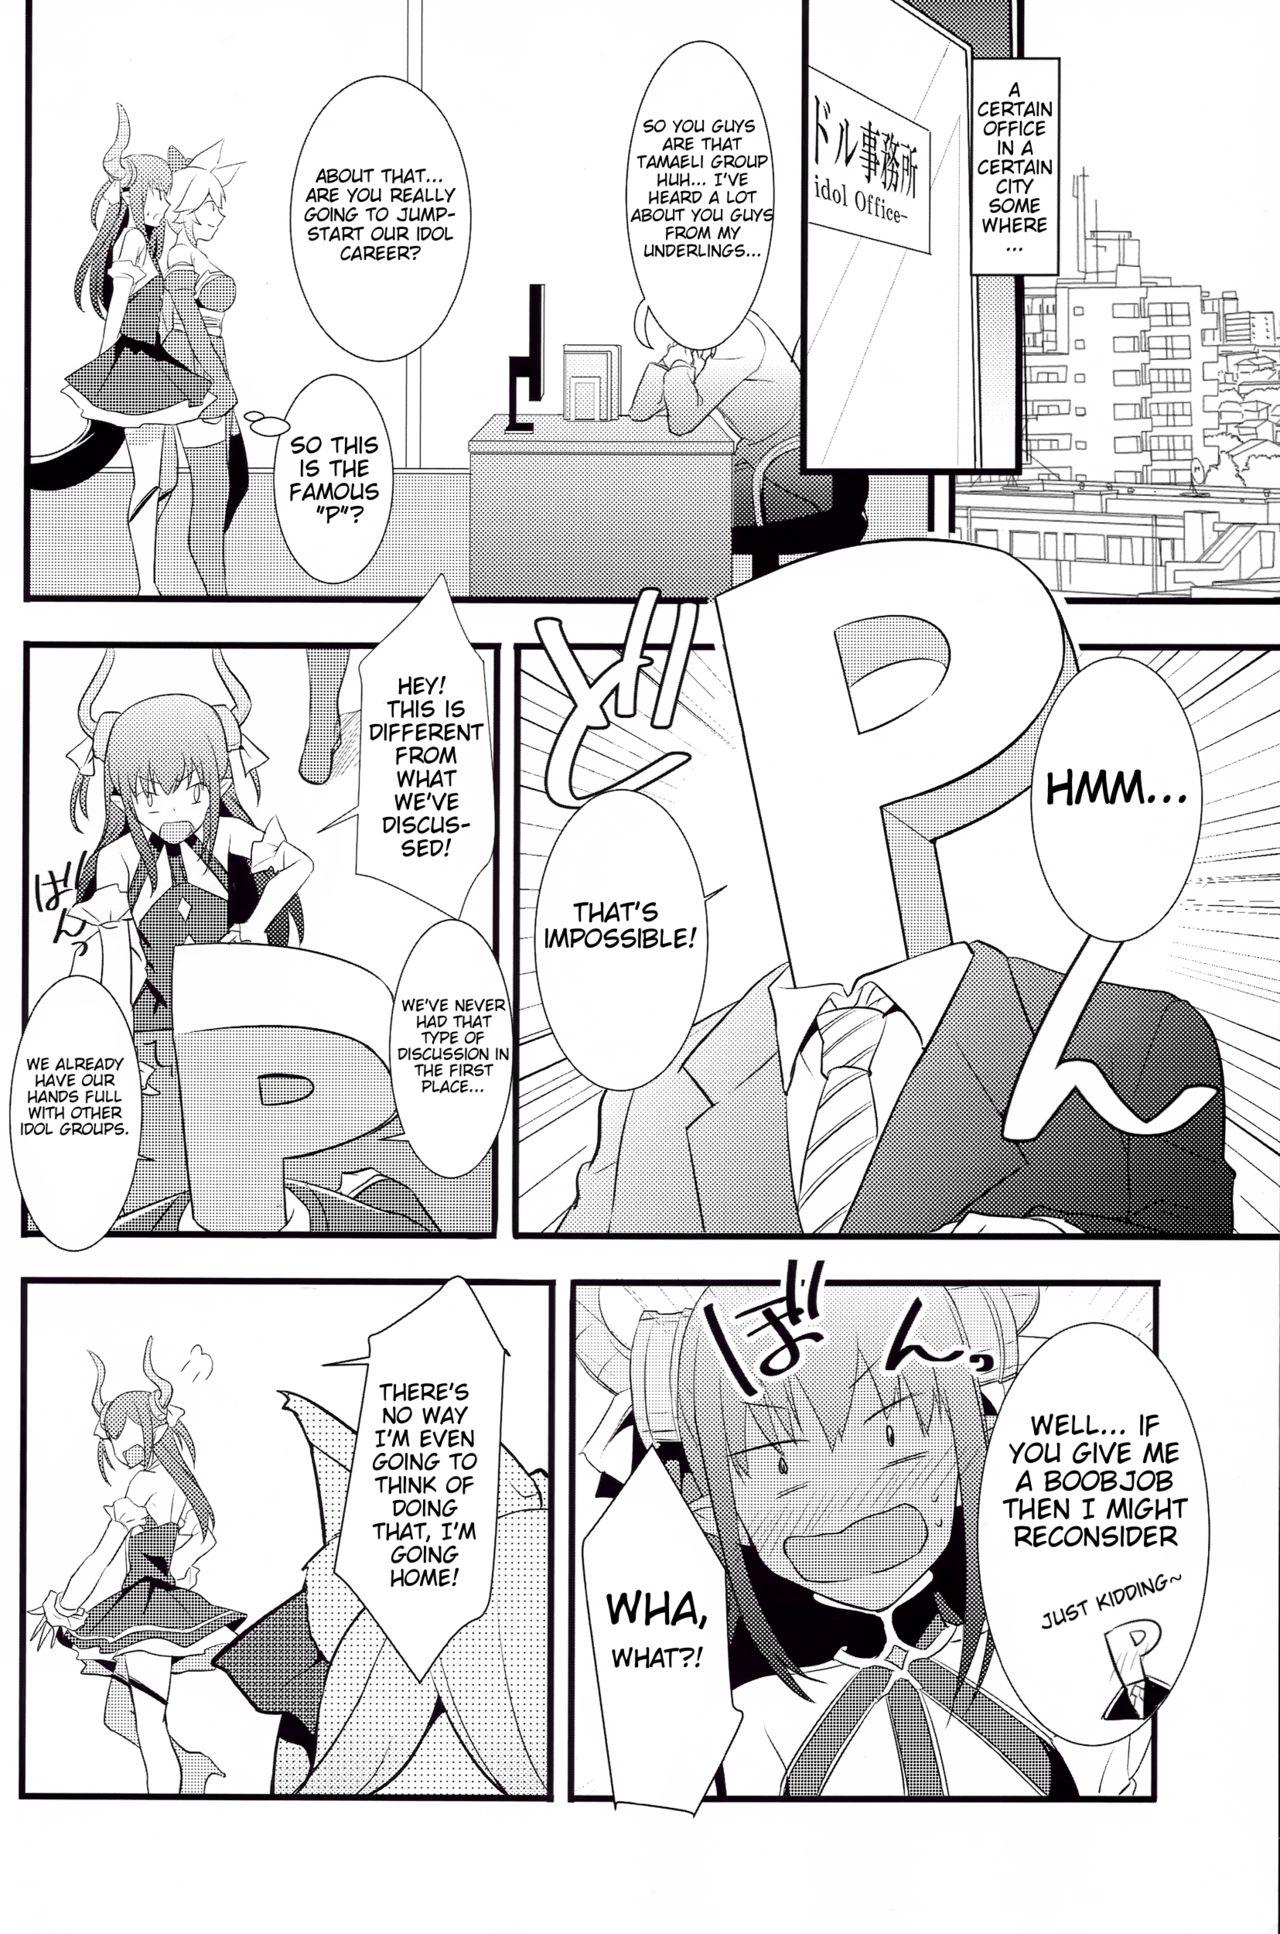 Blowing The IDOL SERVANT - Fate grand order Guys - Page 6